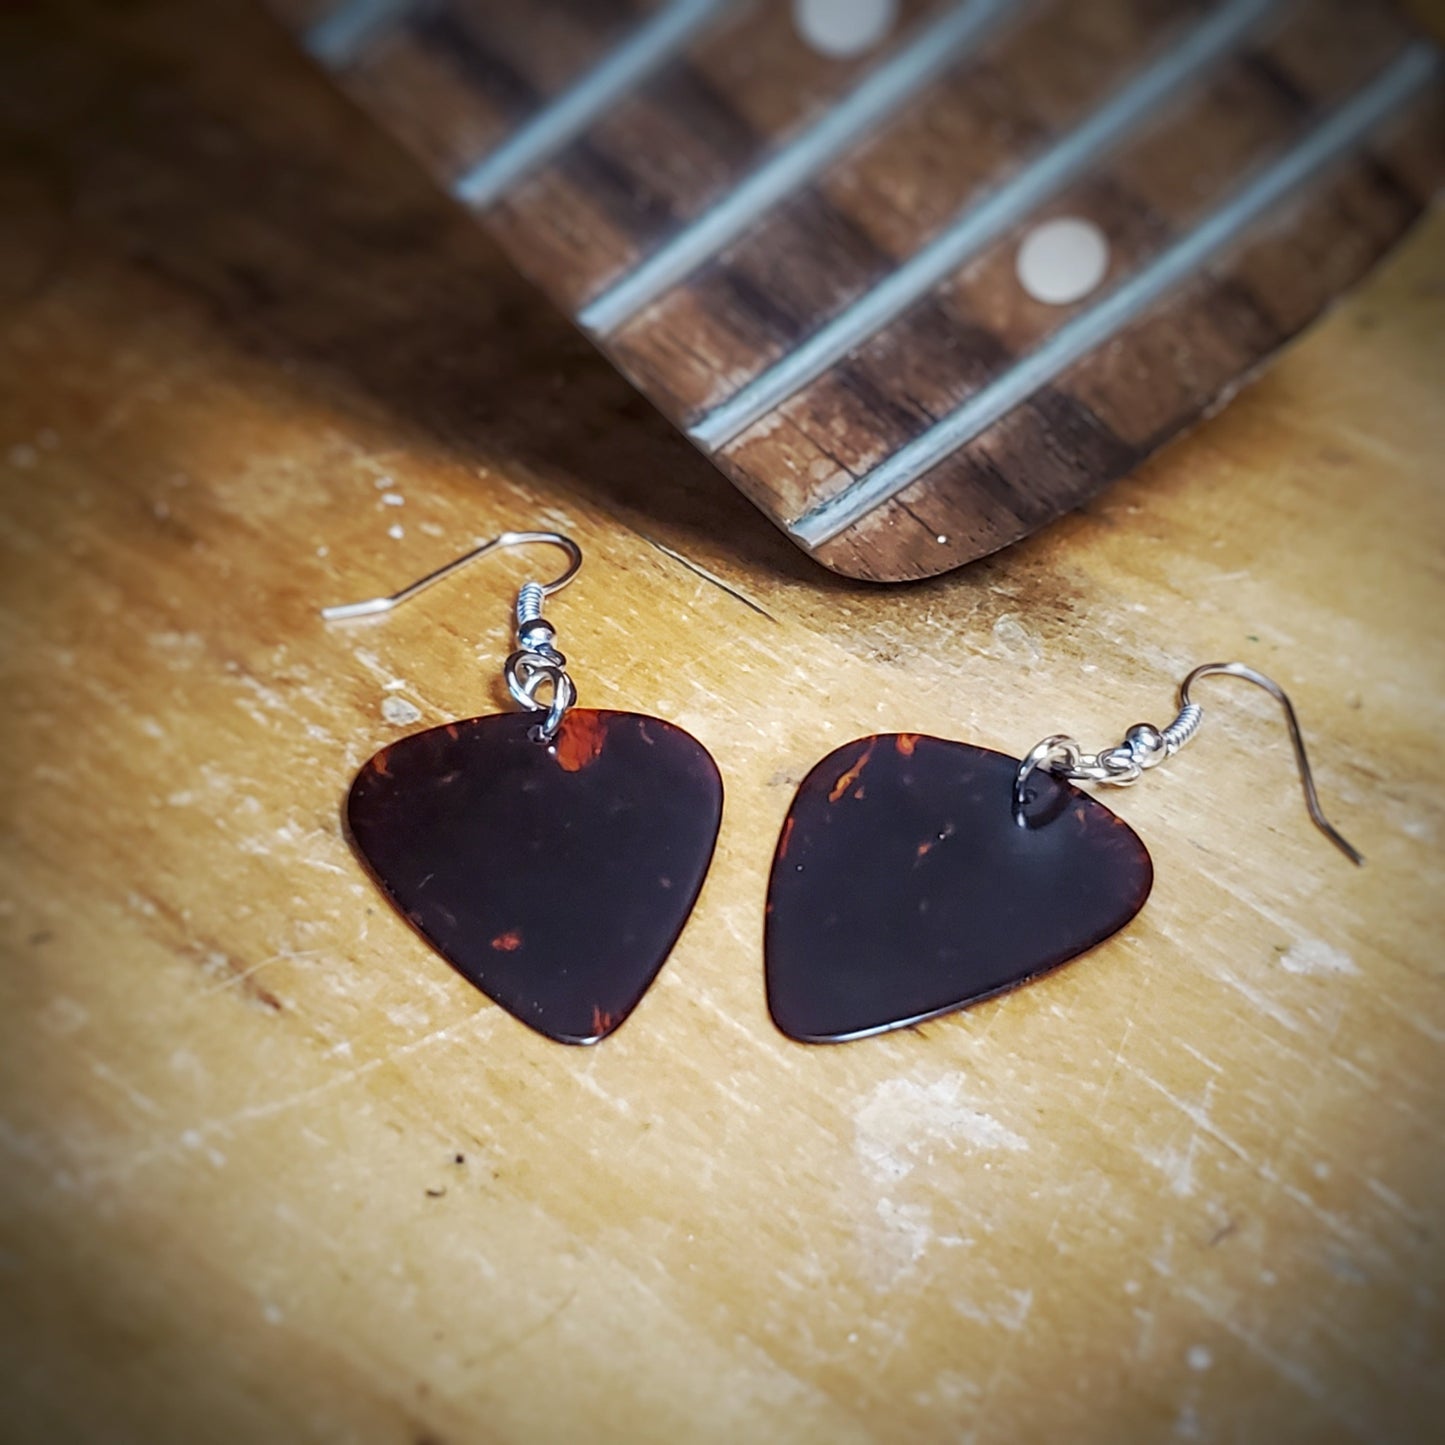 earrings made from turtle shell brown guitar picks sitting under he neck of a guitar from which the strings have been removed